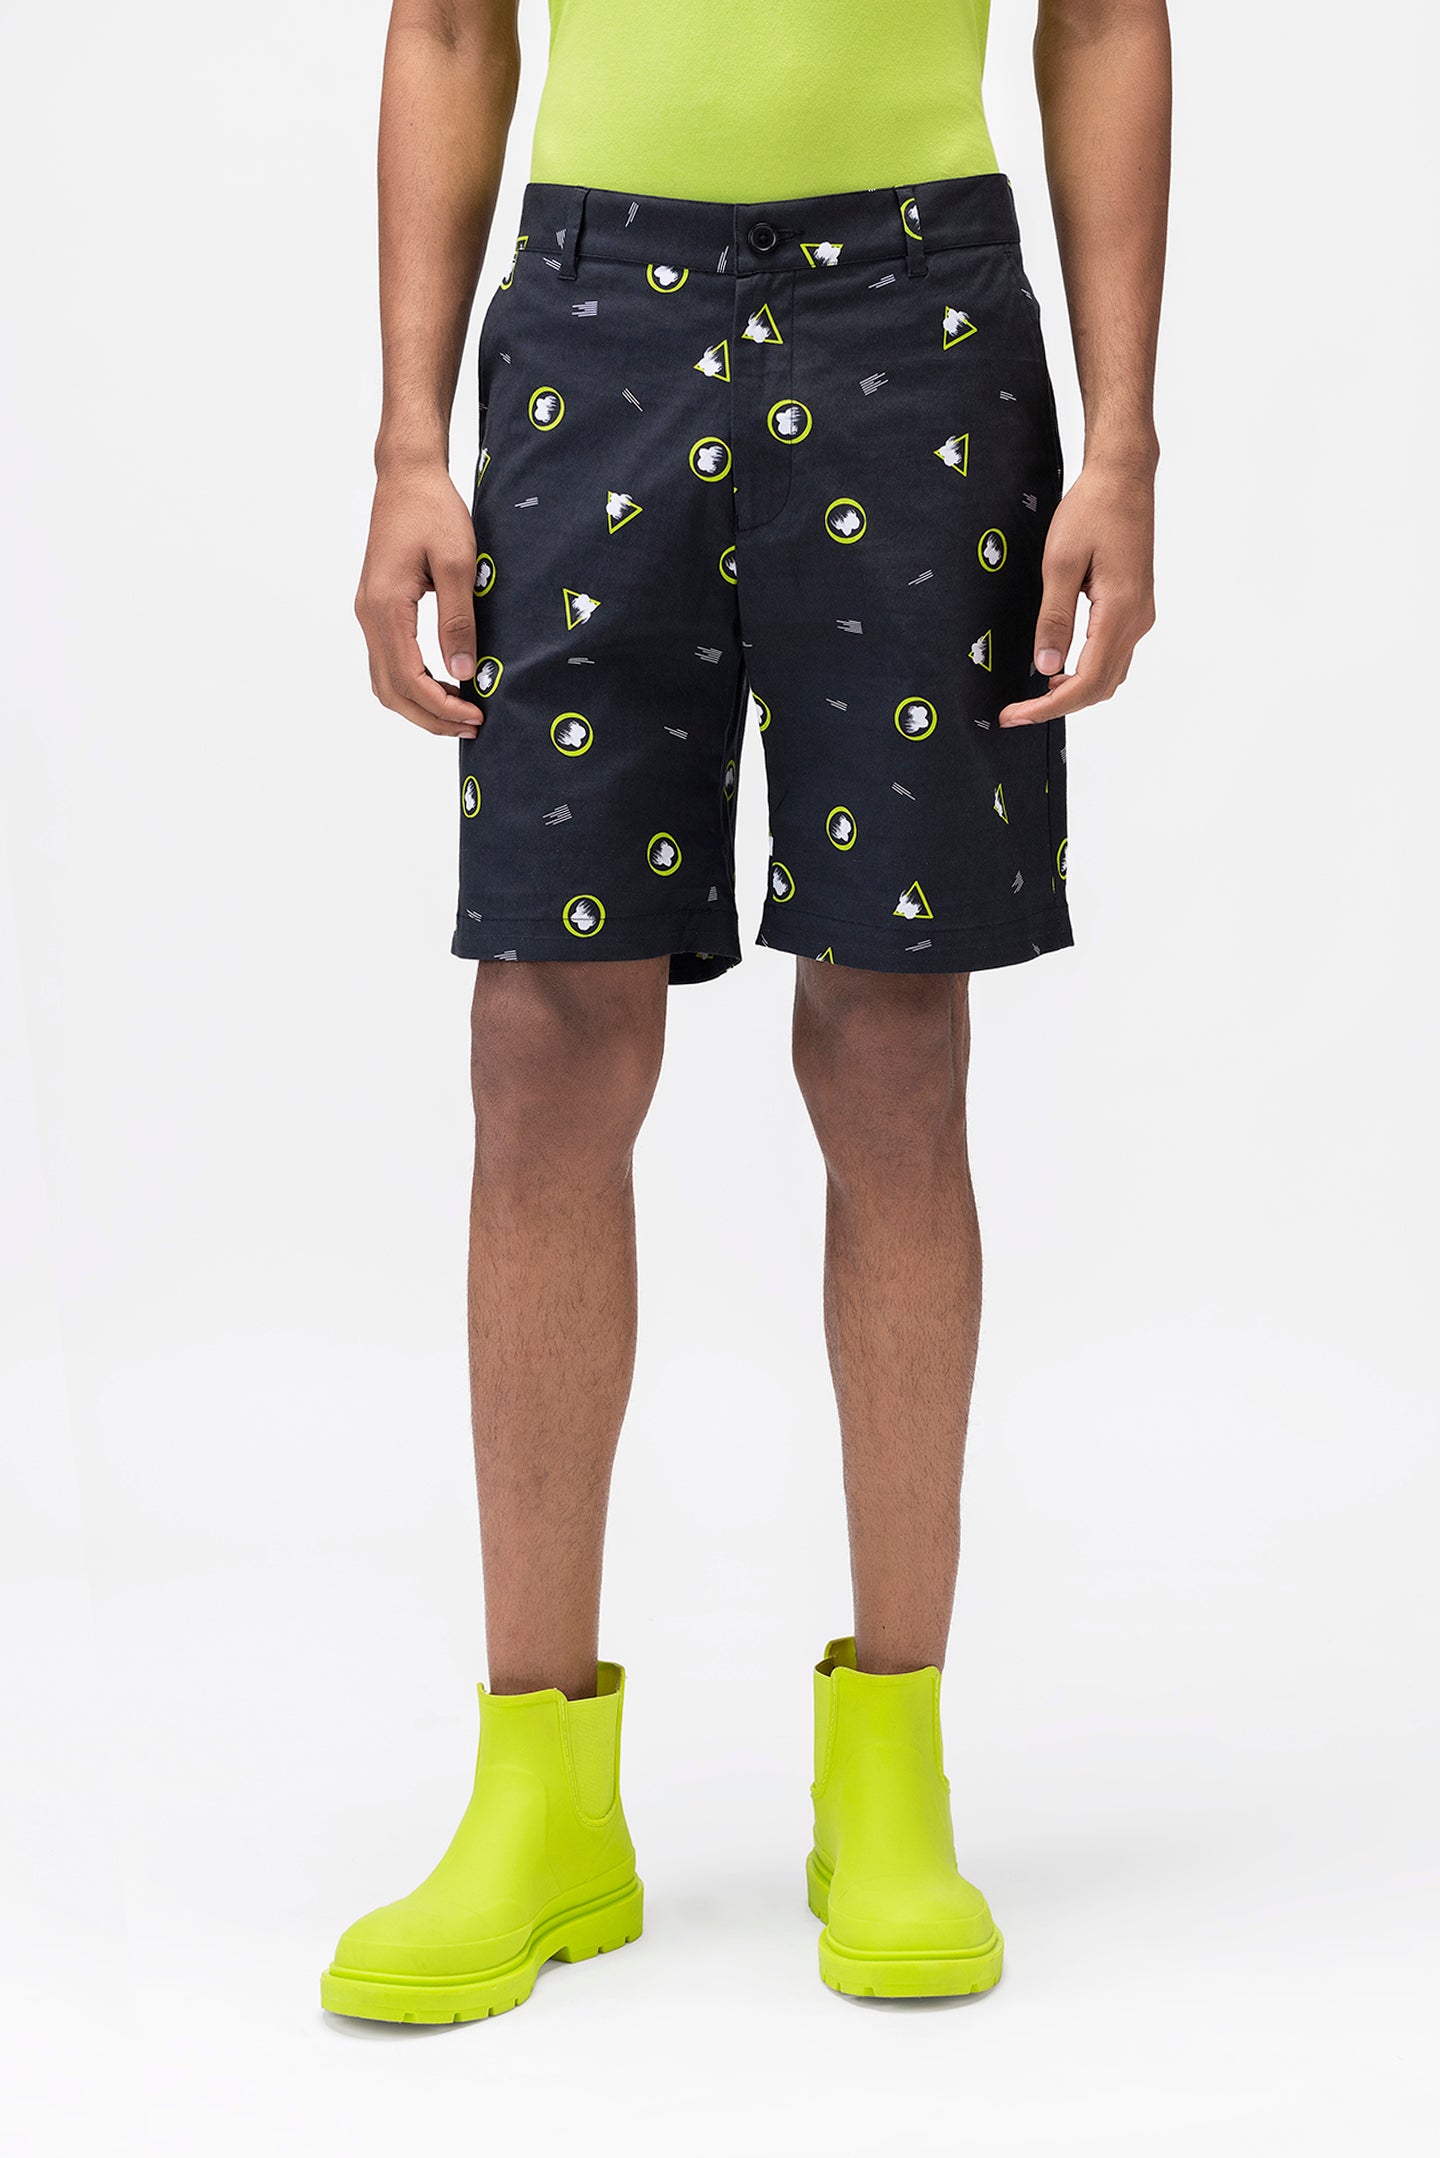 Floral Iconography Mens Shorts